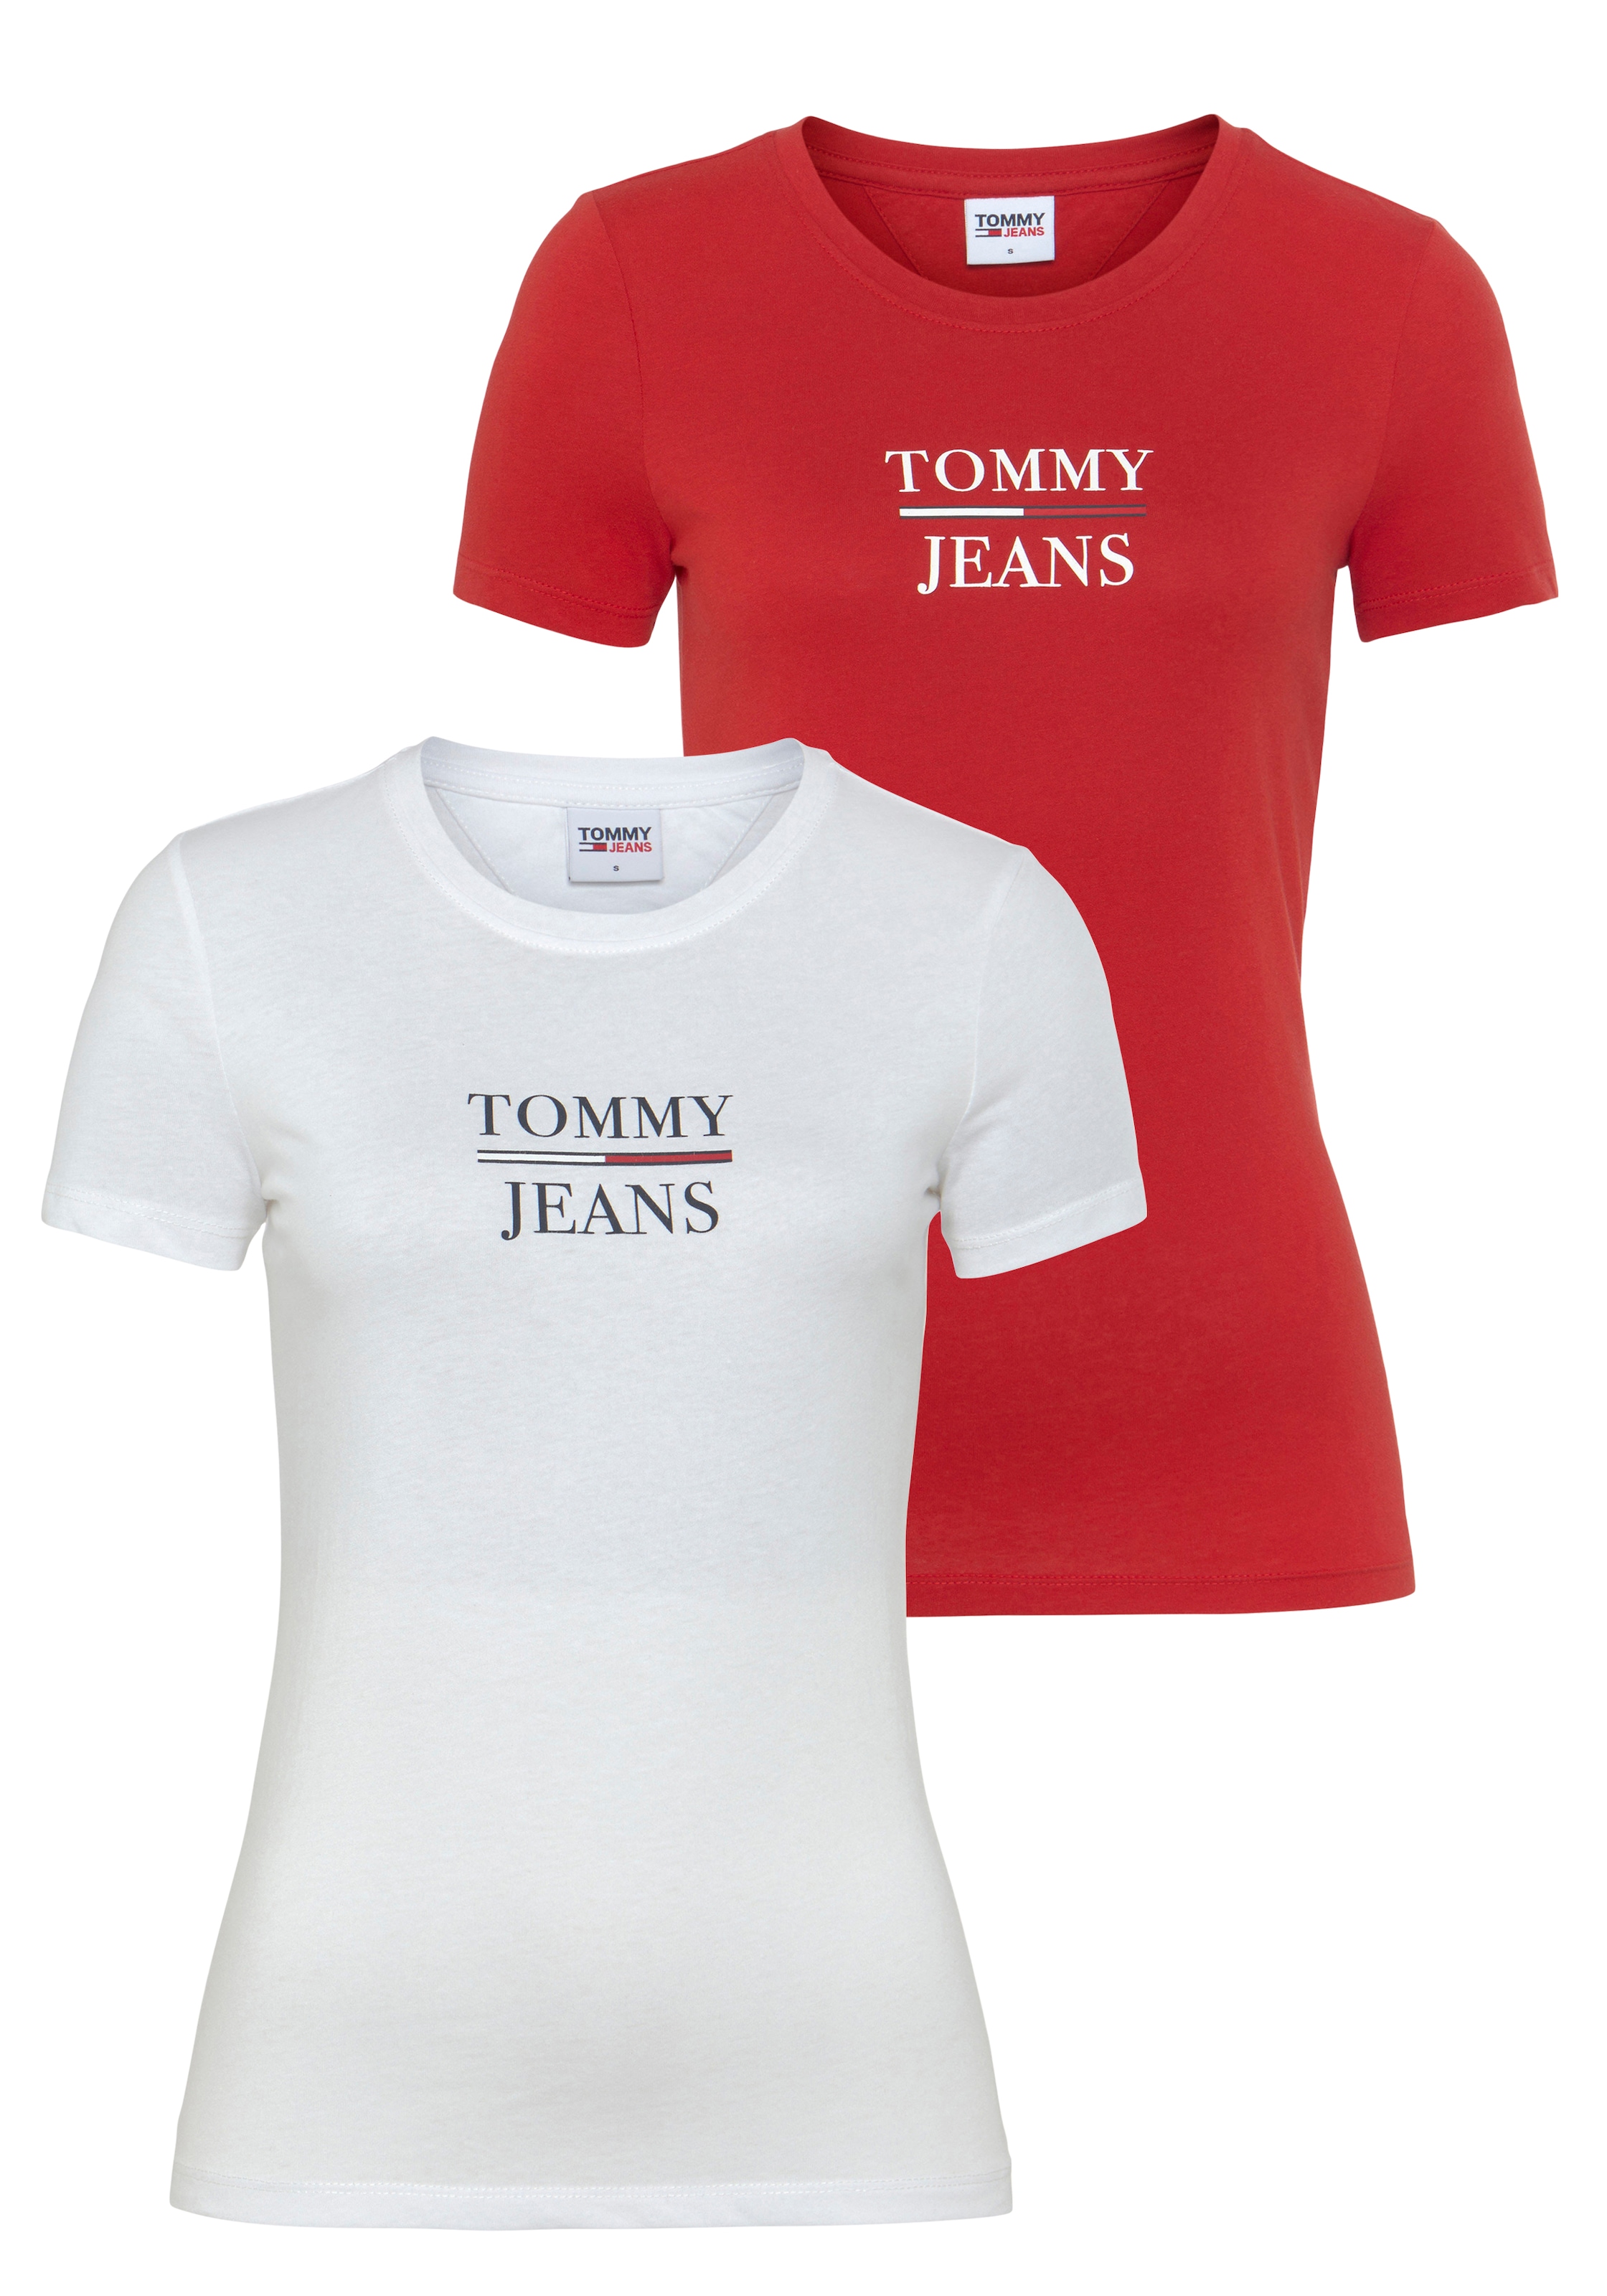 SS«, ♕ T-Shirt Skinny bei ESS 2er-Pack) T »TJW Tommy 2PACK Jeans TOMMY (Packung,